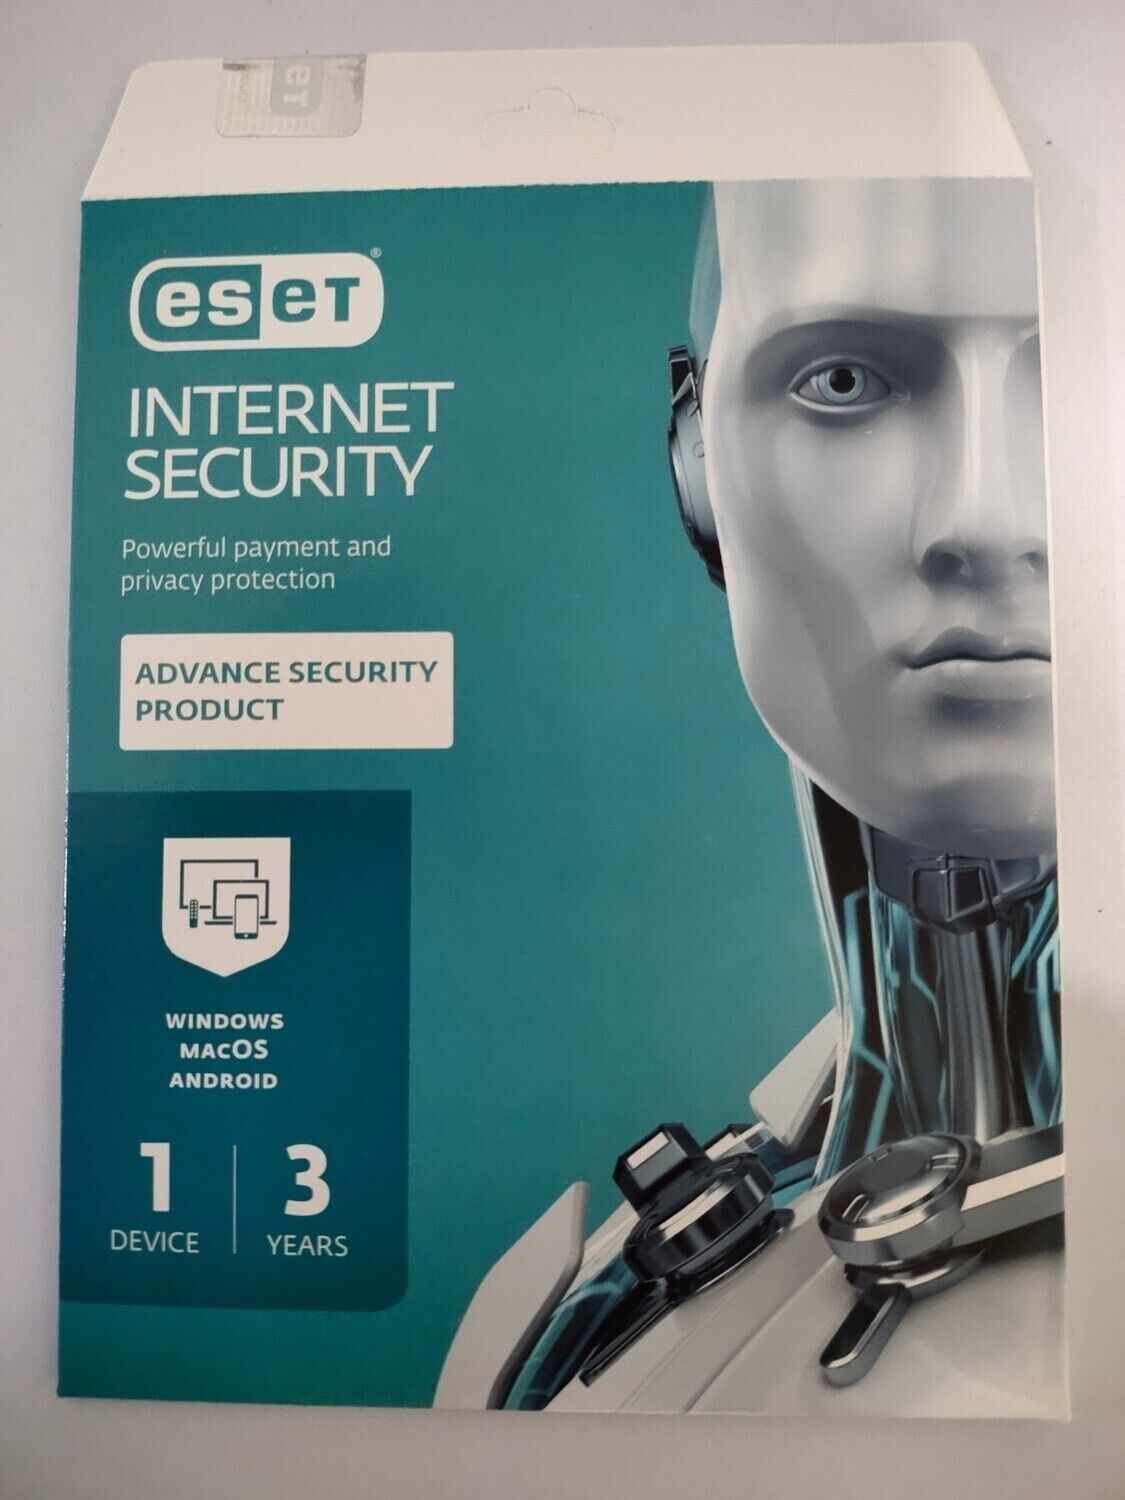 ESET Internet Security (2023) 1 PC - 3 years, Authorized reseller